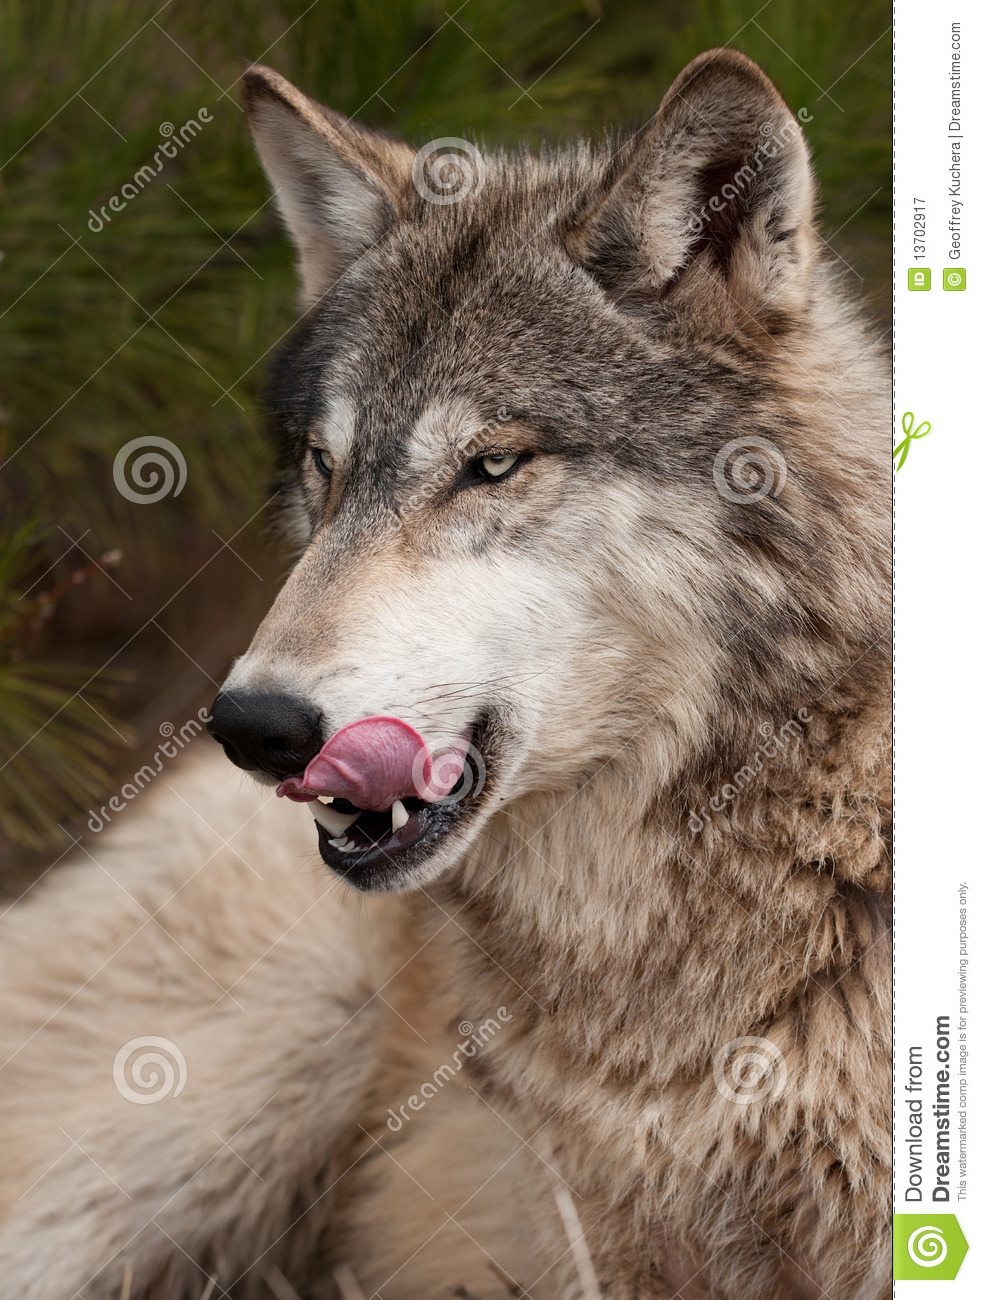 Timber Wolf  Canis Lupus  Licks Chops Royalty Free Stock Photography    